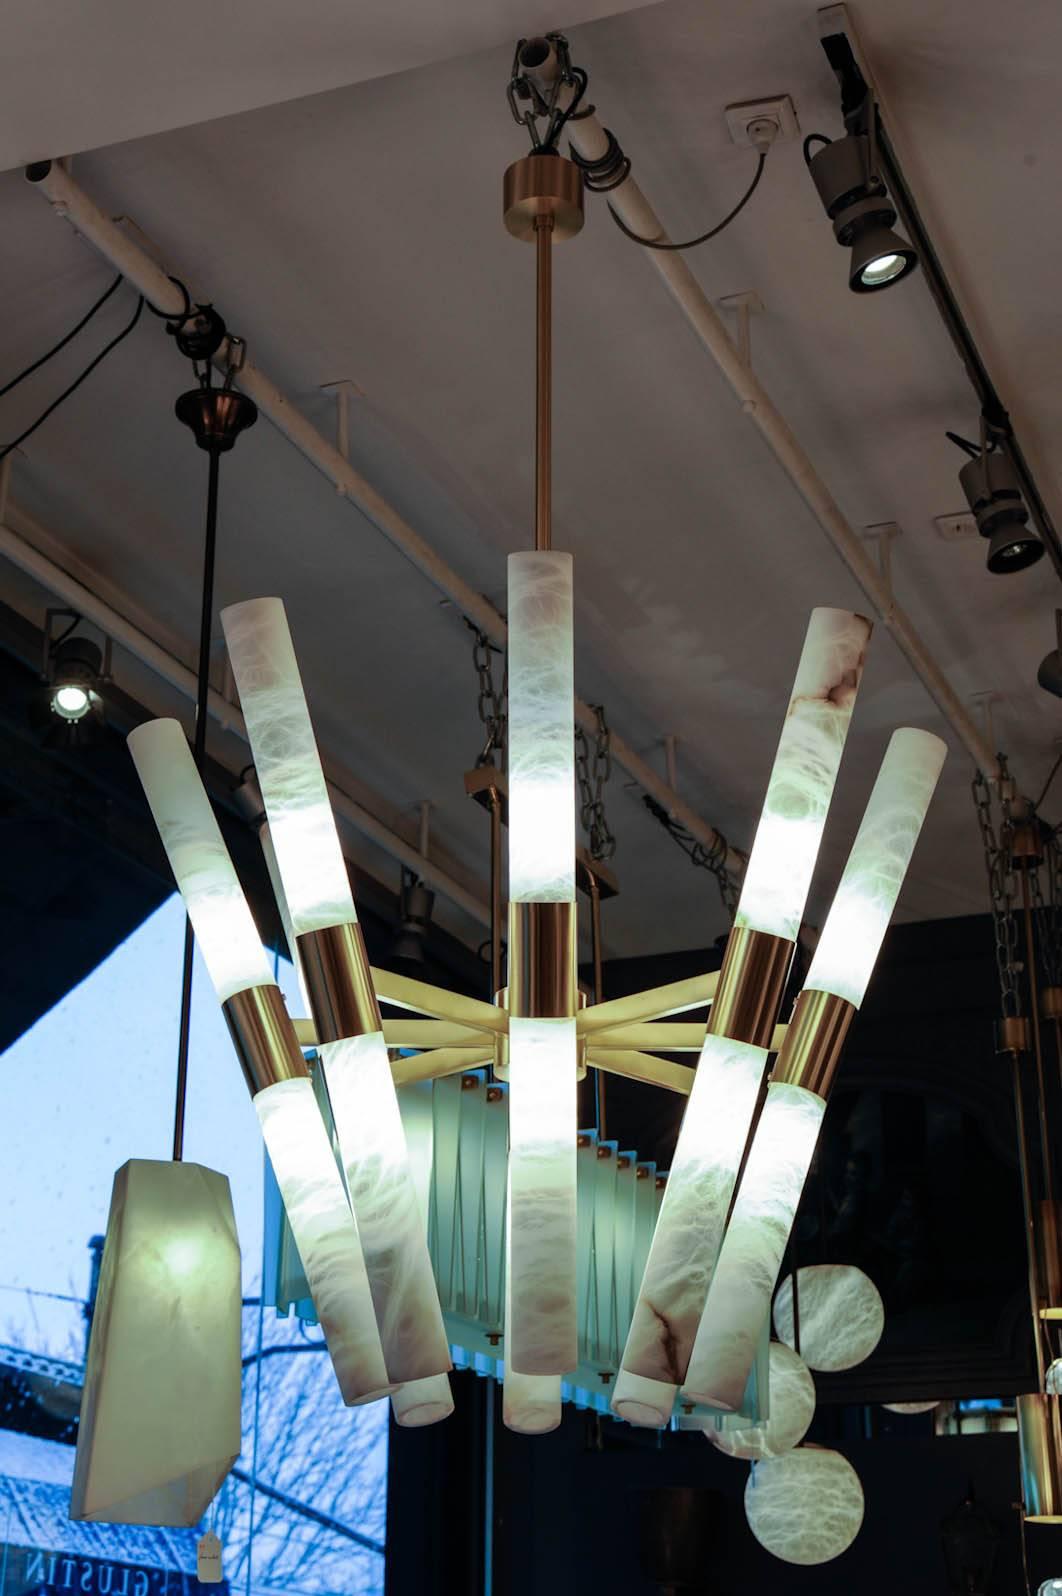 New design by Glustin Luminaires, chandelier made of satin brass chandelier and 16 alabaster rods.

Handmade in Italy by our craftsmen, this chandelier has it's alabaster supports tilted which gather them at the bottom and spread at the top.